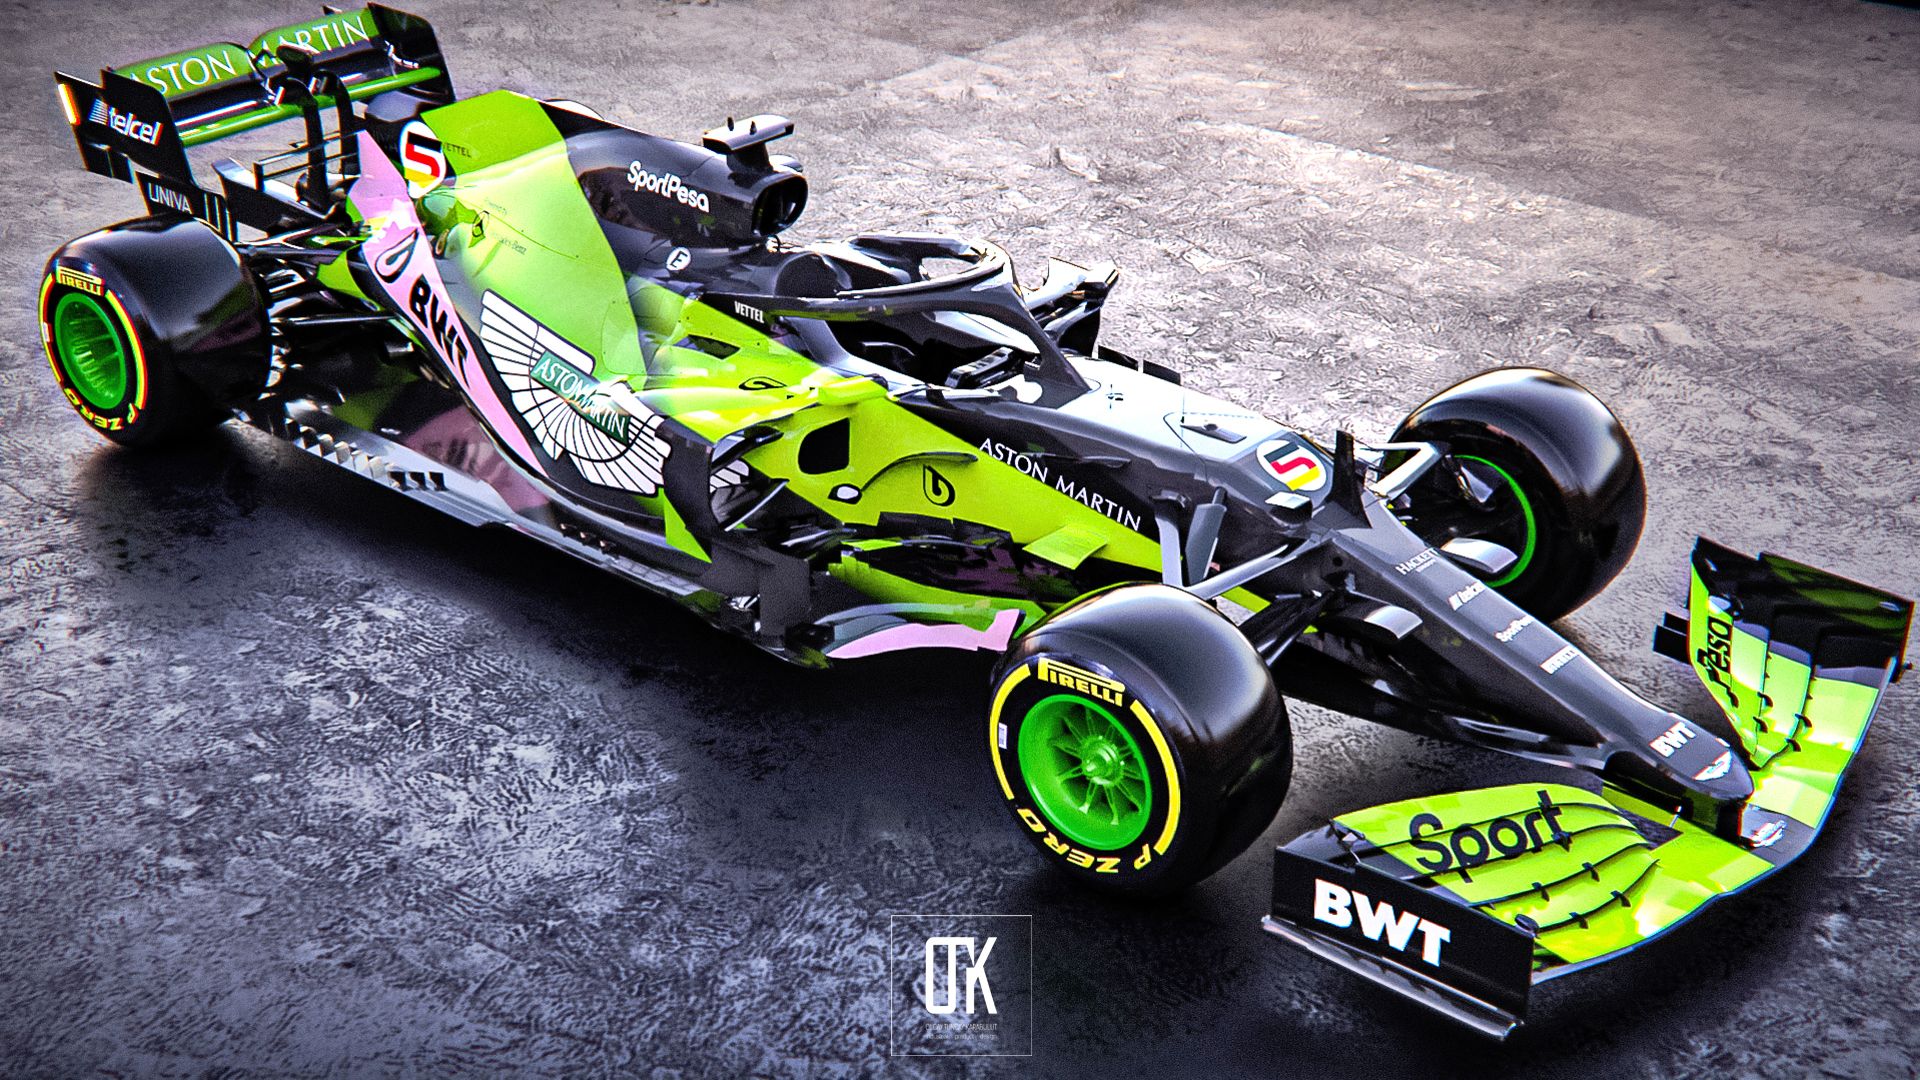 Is This What The Aston Martin F1 Car Could Look Like?